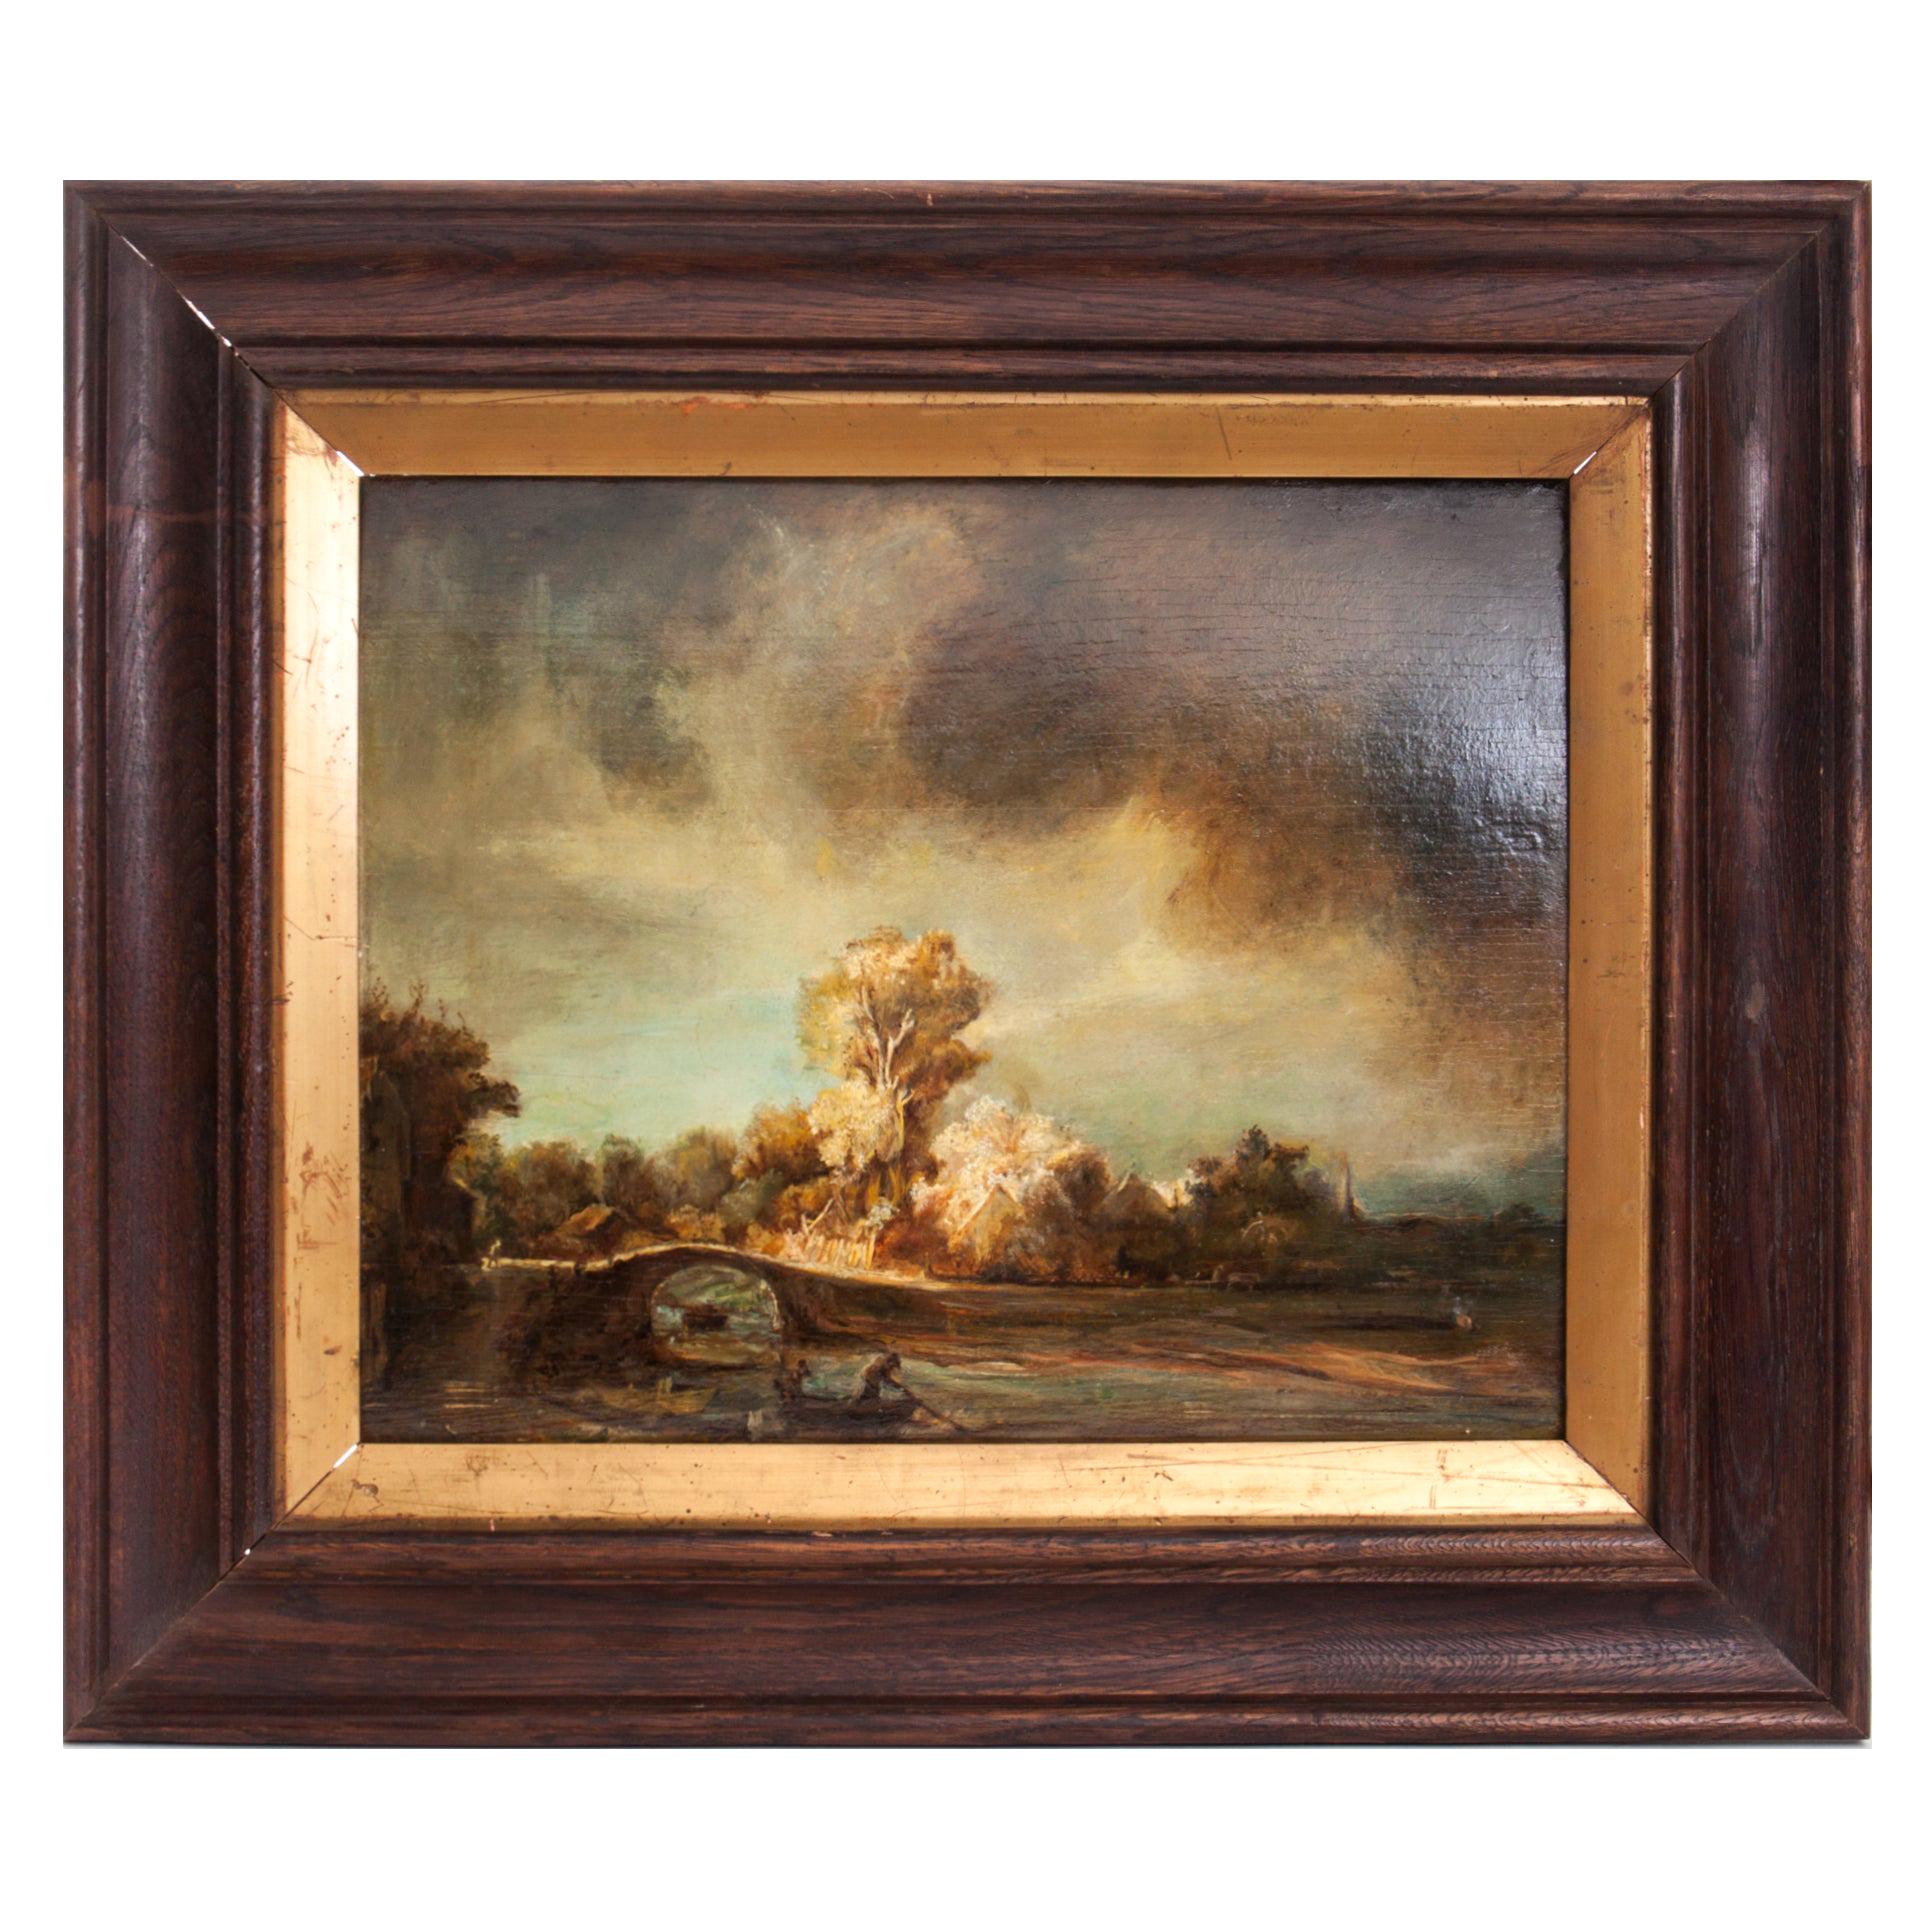 Landscape with a Stone Bridge Unknown Rembrandt Copy Oil on Board Wooden Frame 